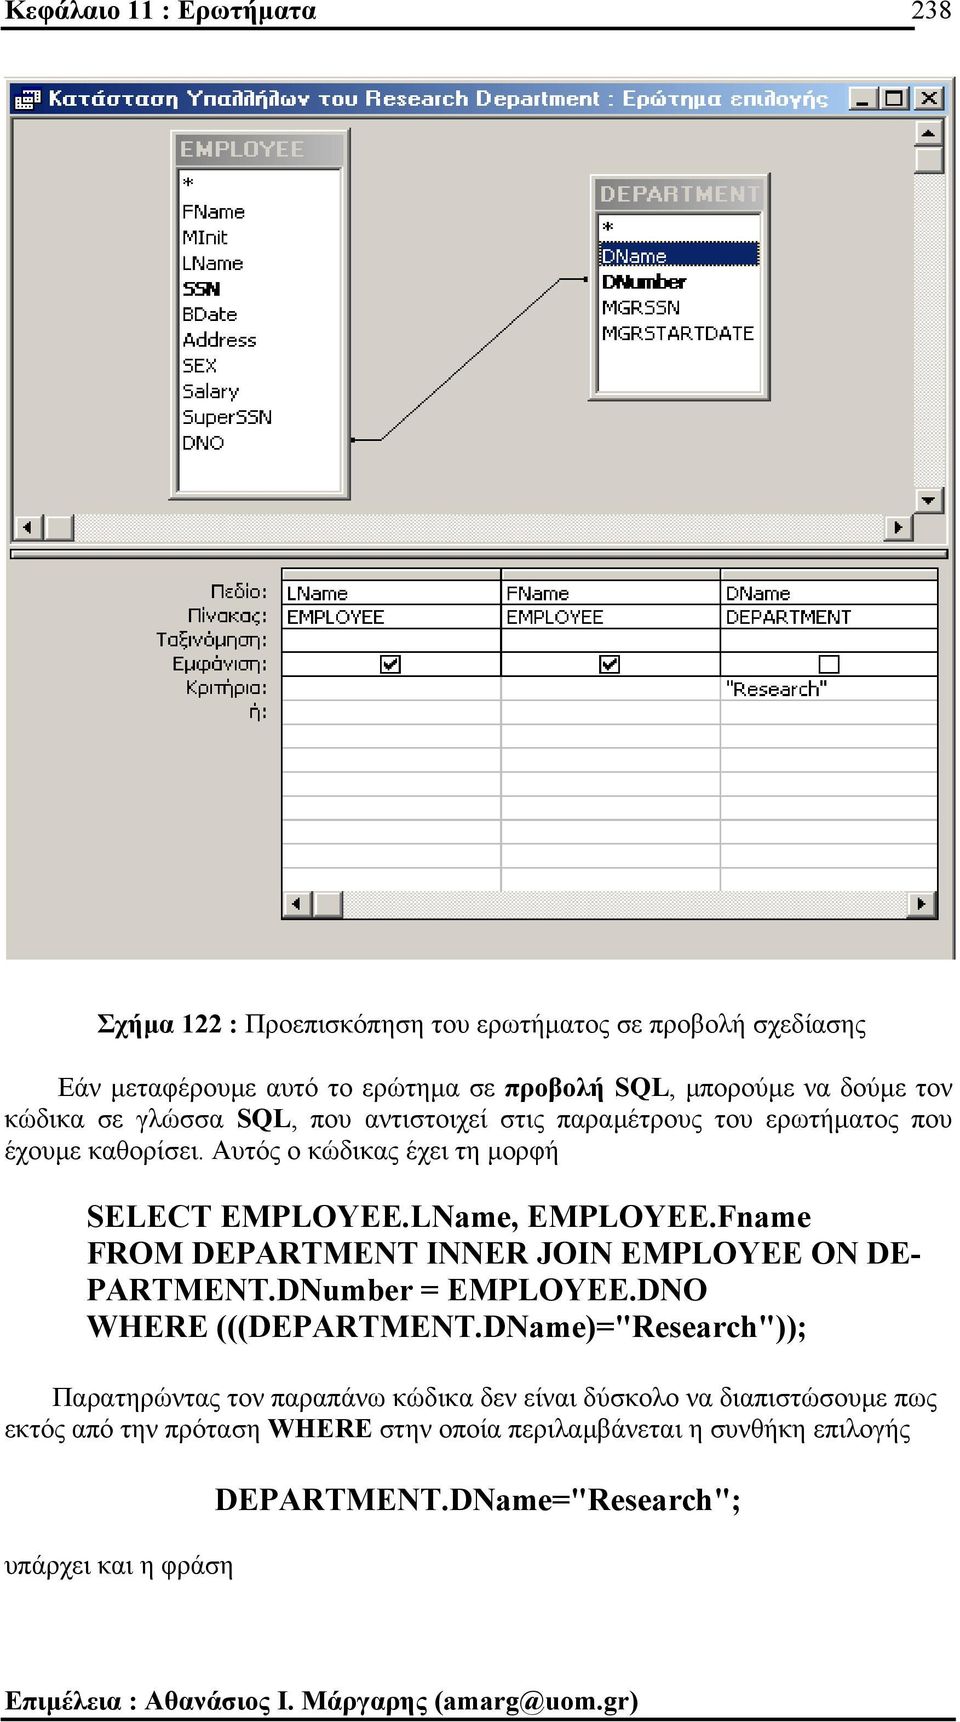 Fname FROM DEPARTMENT INNER JOIN EMPLOYEE ON DE- PARTMENT.DNumber = EMPLOYEE.DNO WHERE (((DEPARTMENT.